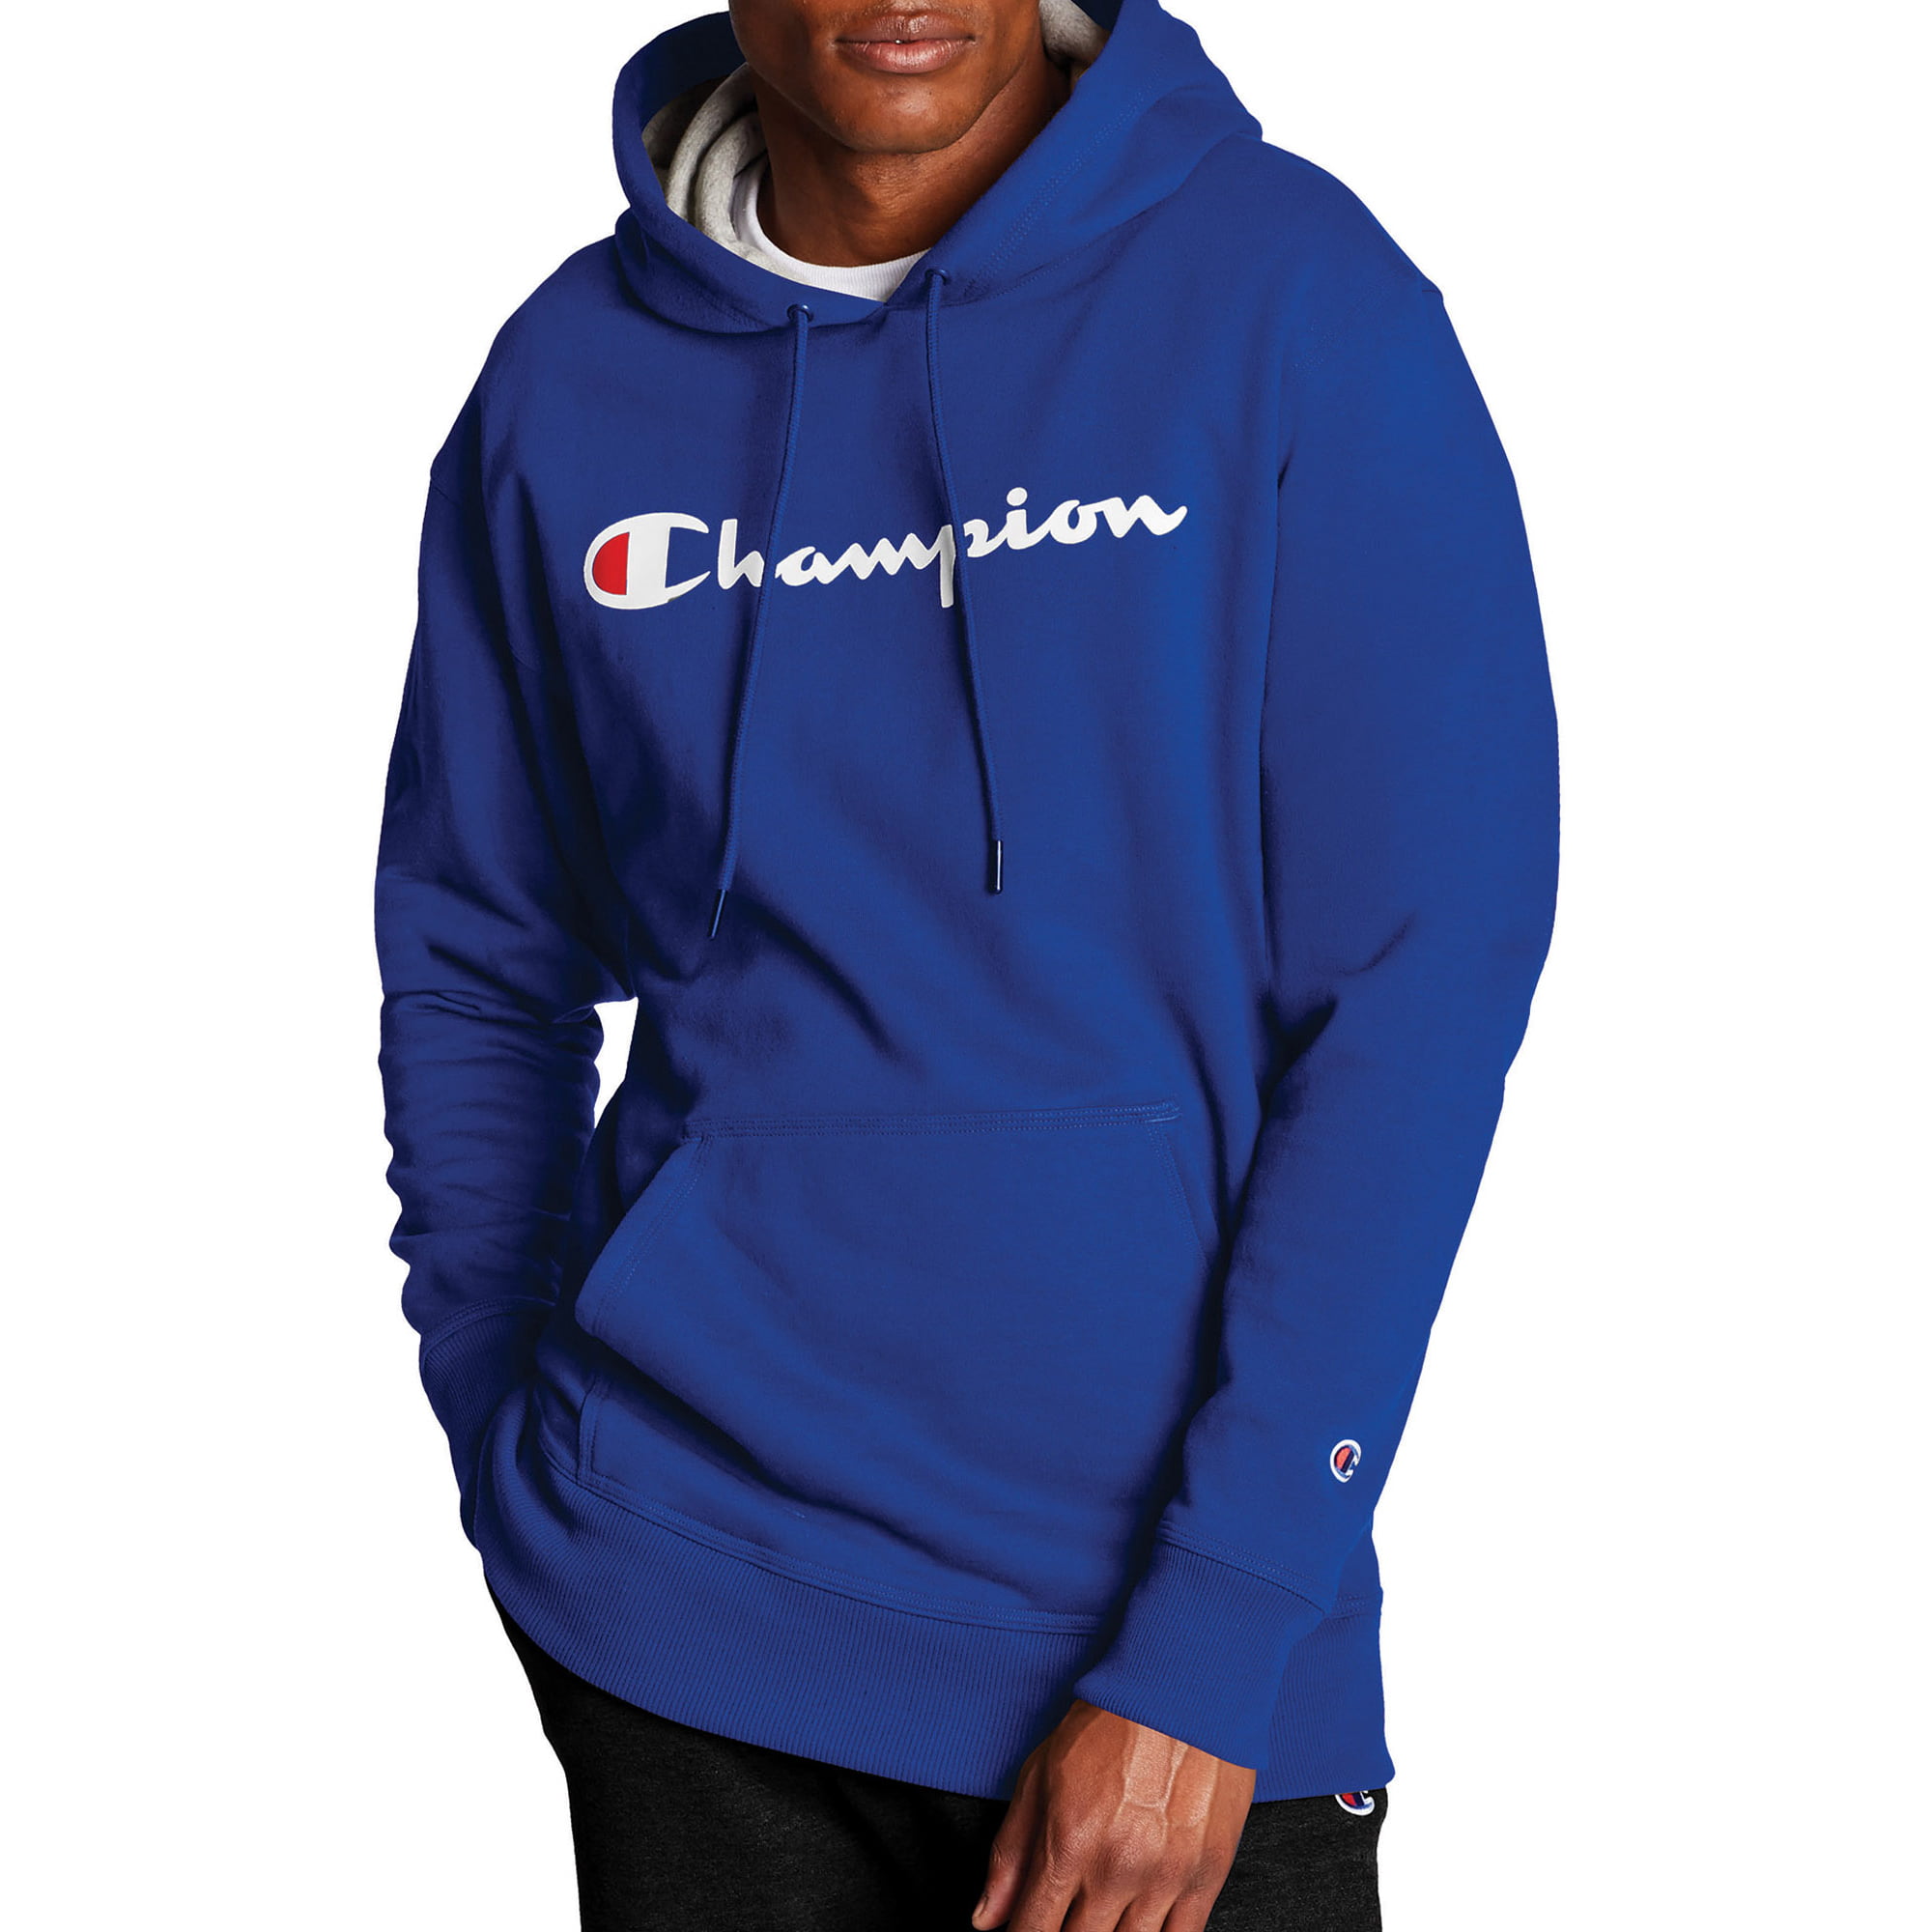 Champion Men's Powerblend Fleece Graphic Pullover Hoodie (Blue, Large-XL) $18.28 + Free Shipping w/ Walmart+ or on $35+